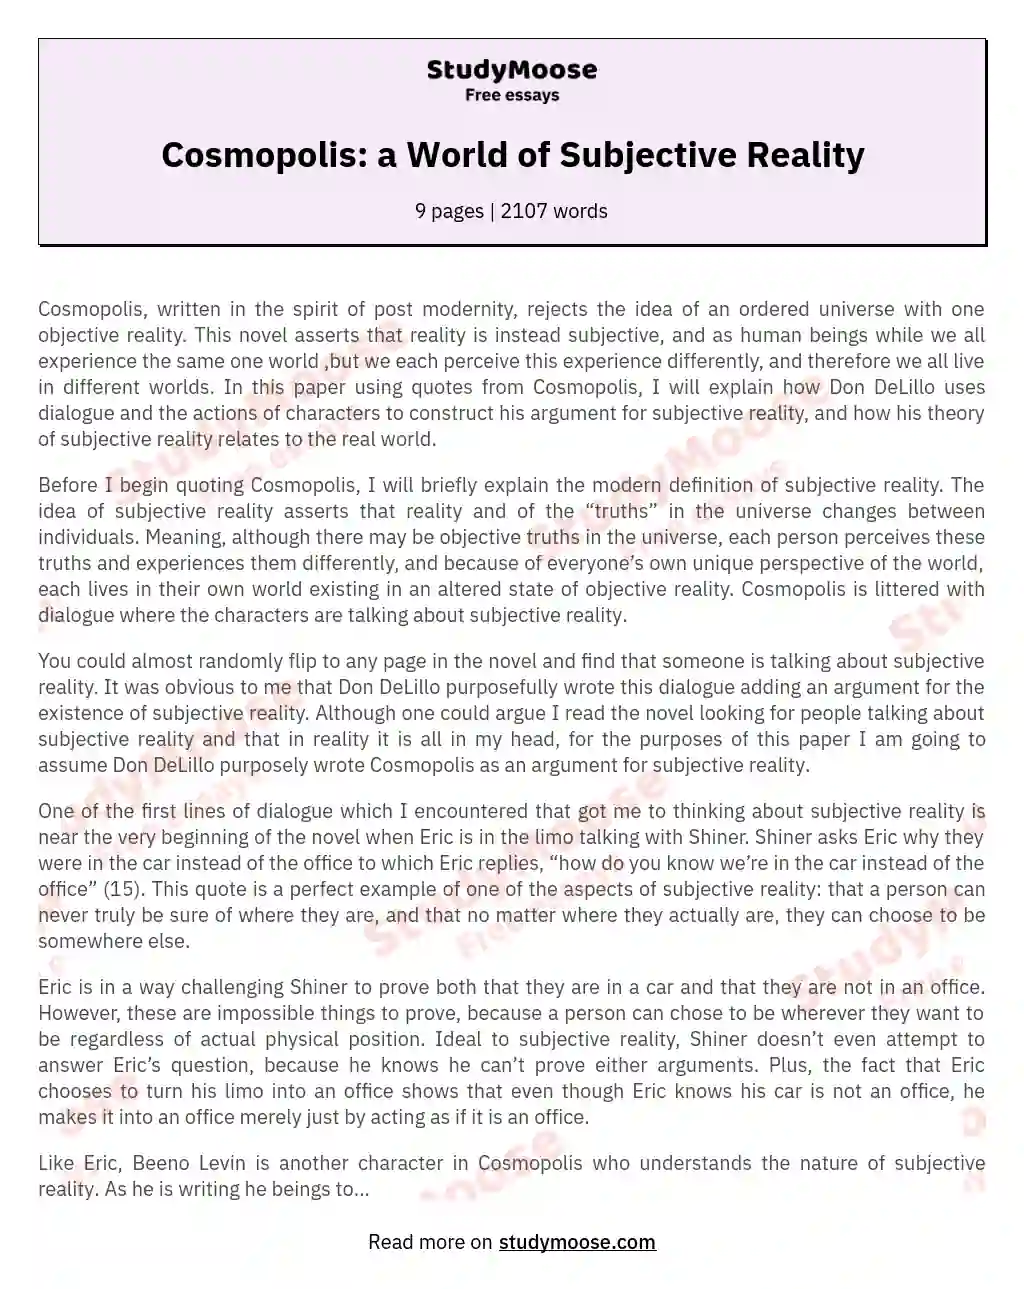 Subjective Reality in Cosmopolis: Challenging Perceptions essay